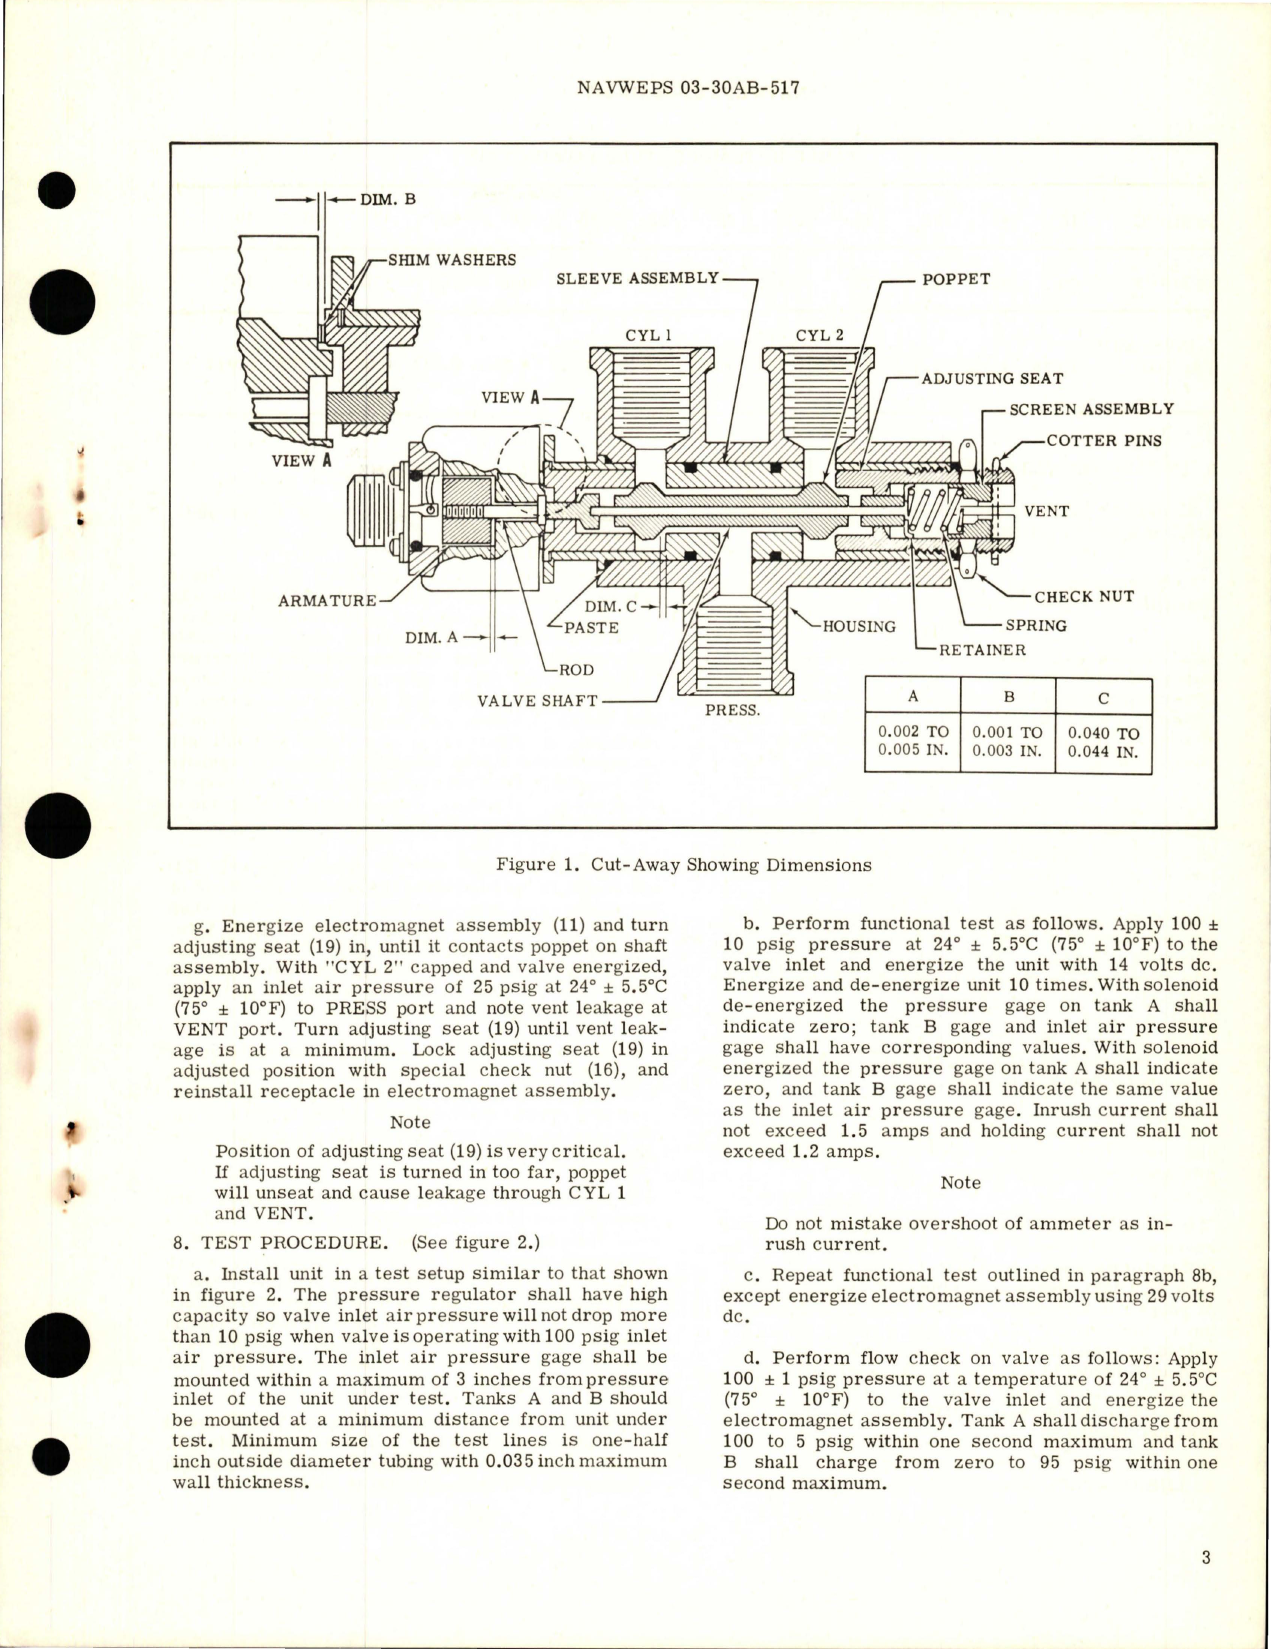 Sample page 5 from AirCorps Library document: Overhaul Instructions with Parts Breakdown for Four-Way Electromagnetic Valve - Part 104298 - Model EV2-1 